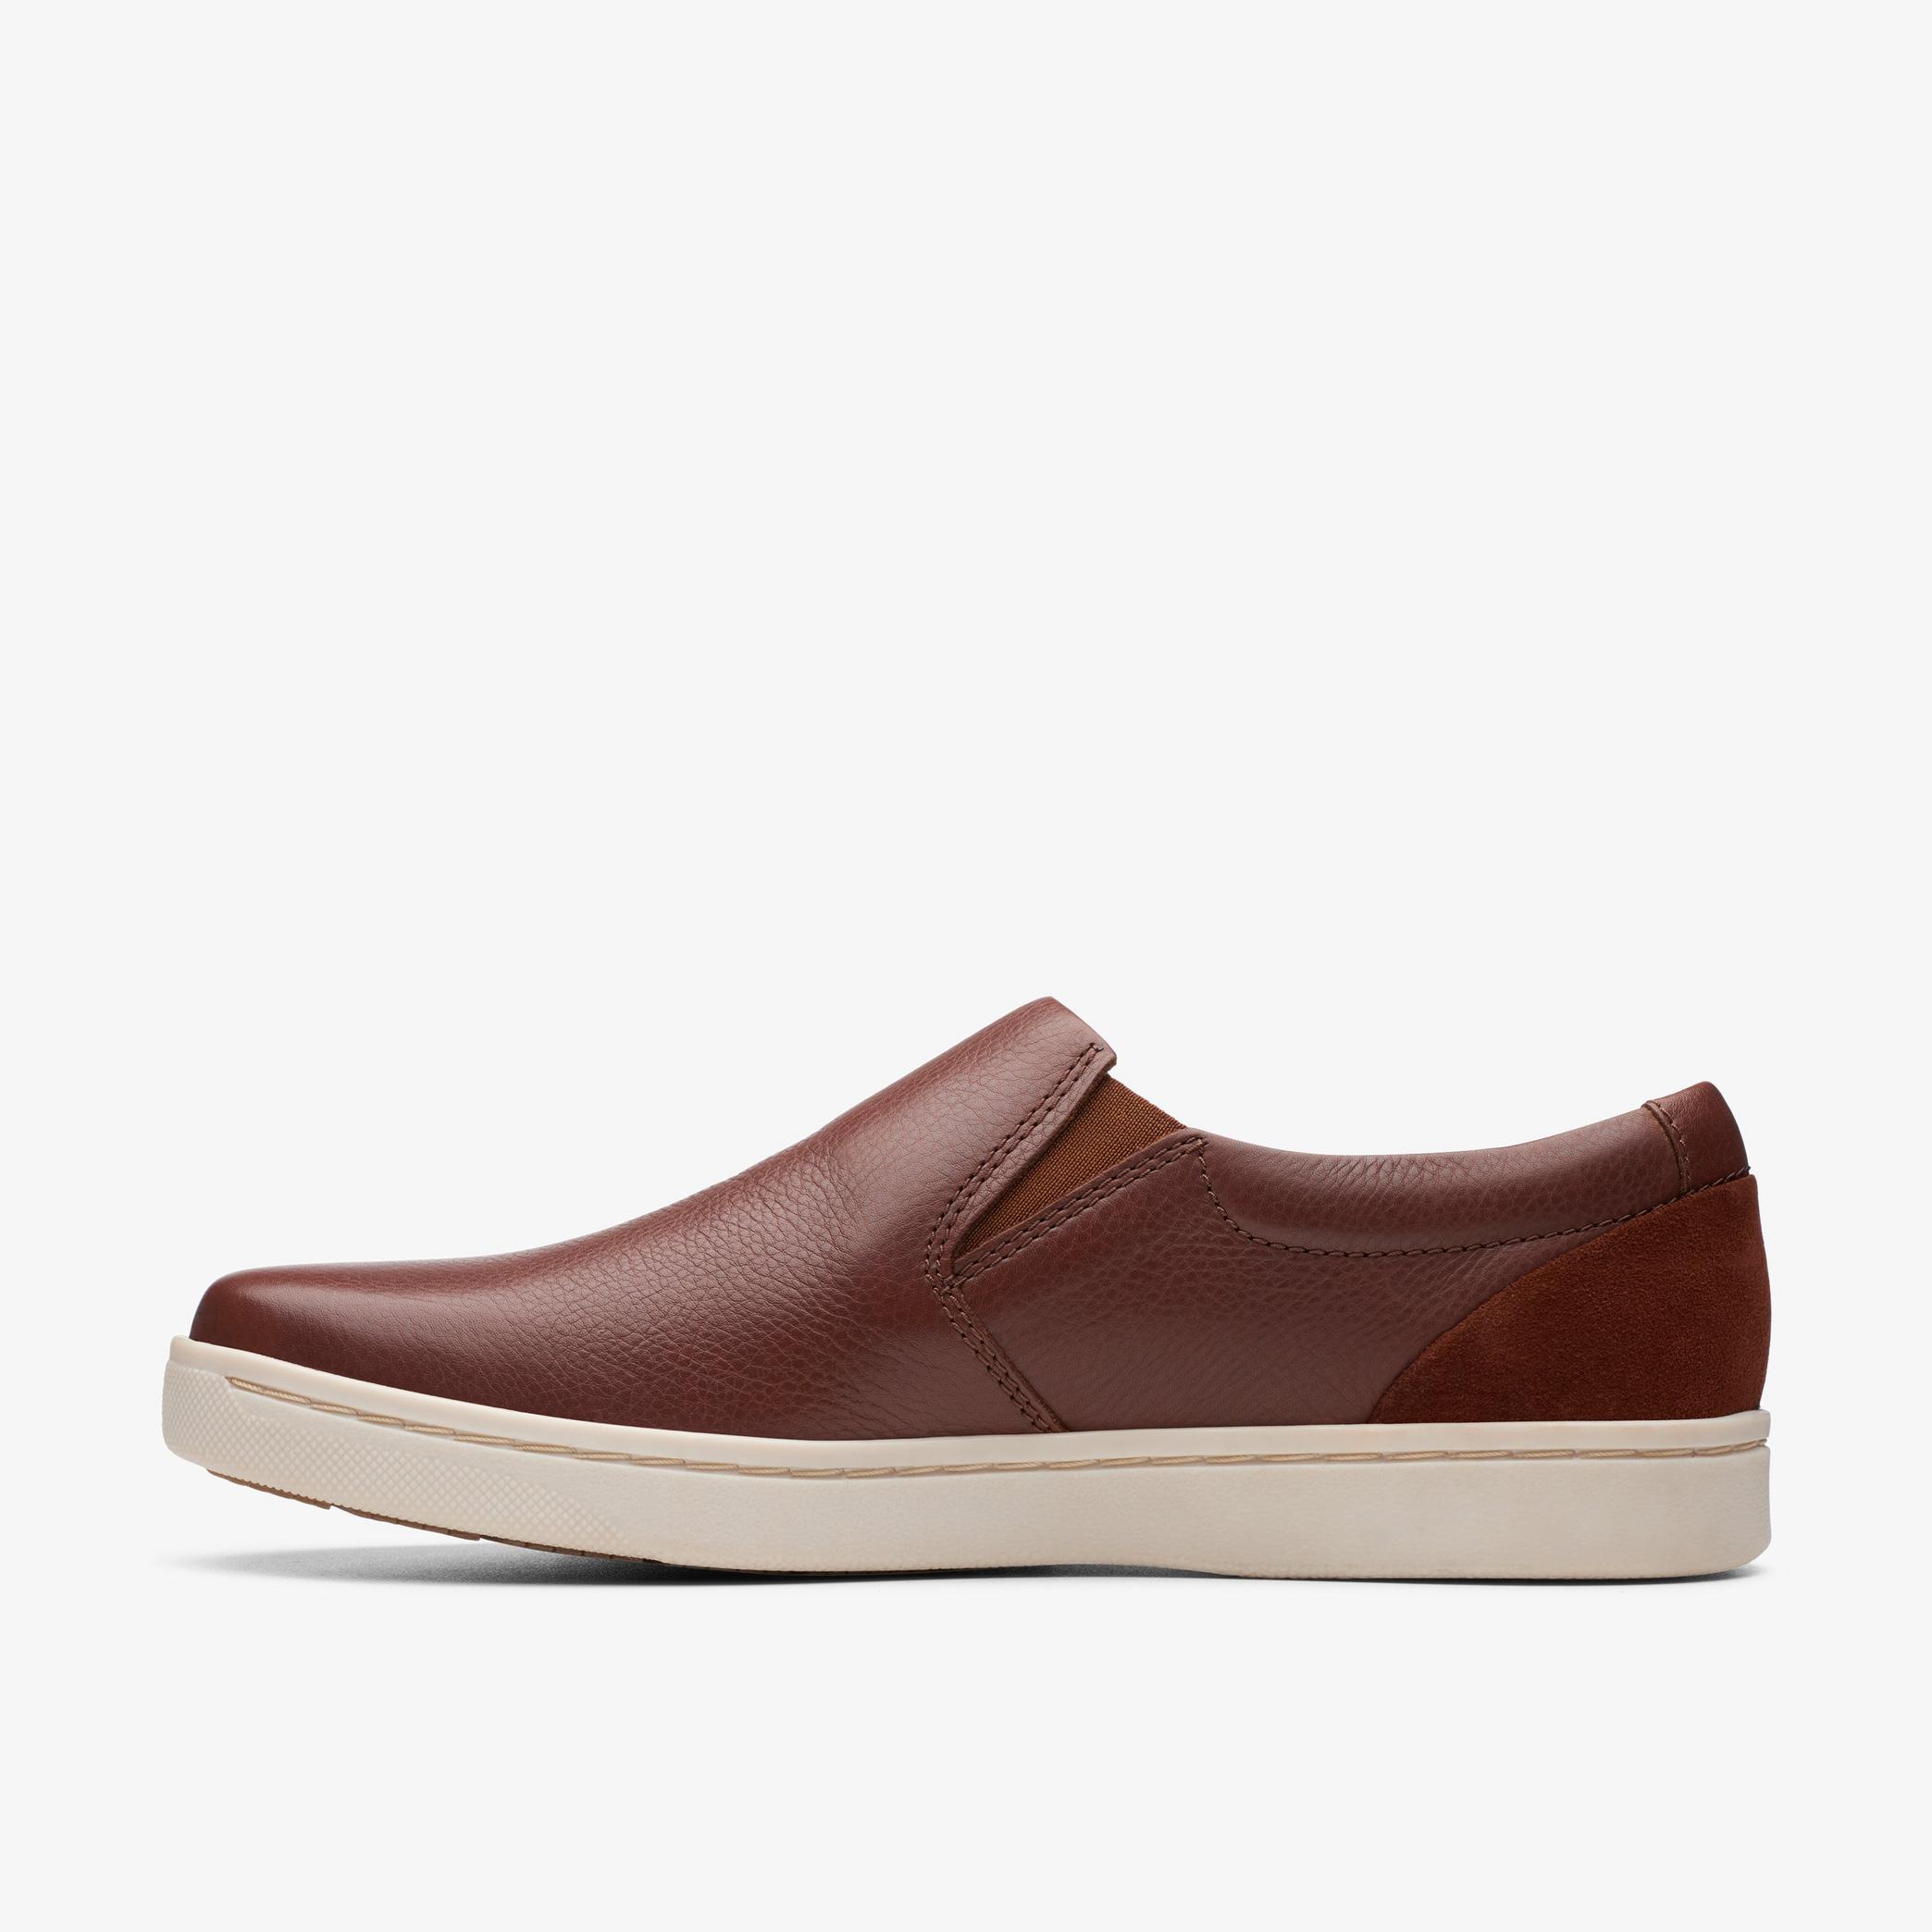 Kitna Free Mahogany Leather Loafers, view 2 of 6